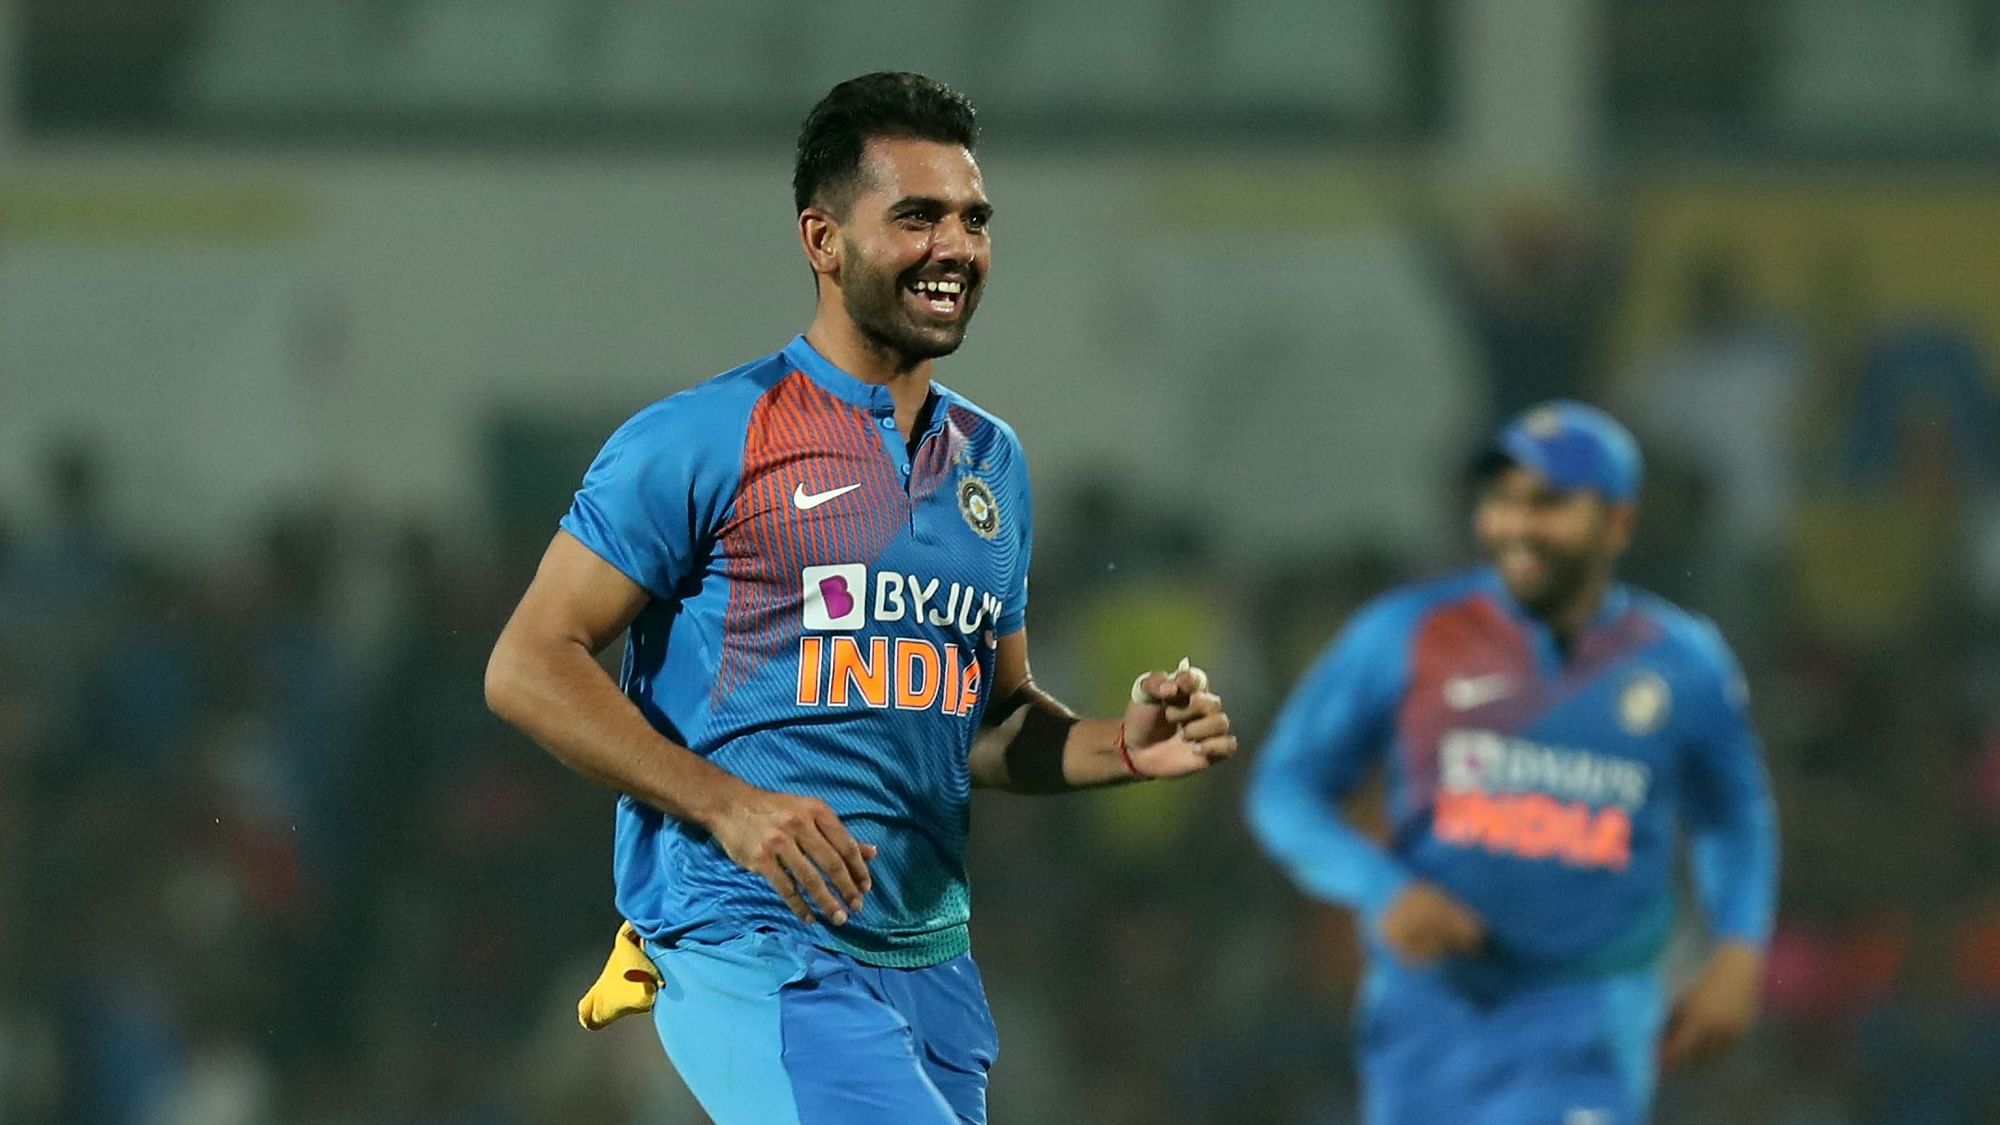 Deepak Chahar breaks records with his 6/7 vs Bangladesh in the Nagpur T20.